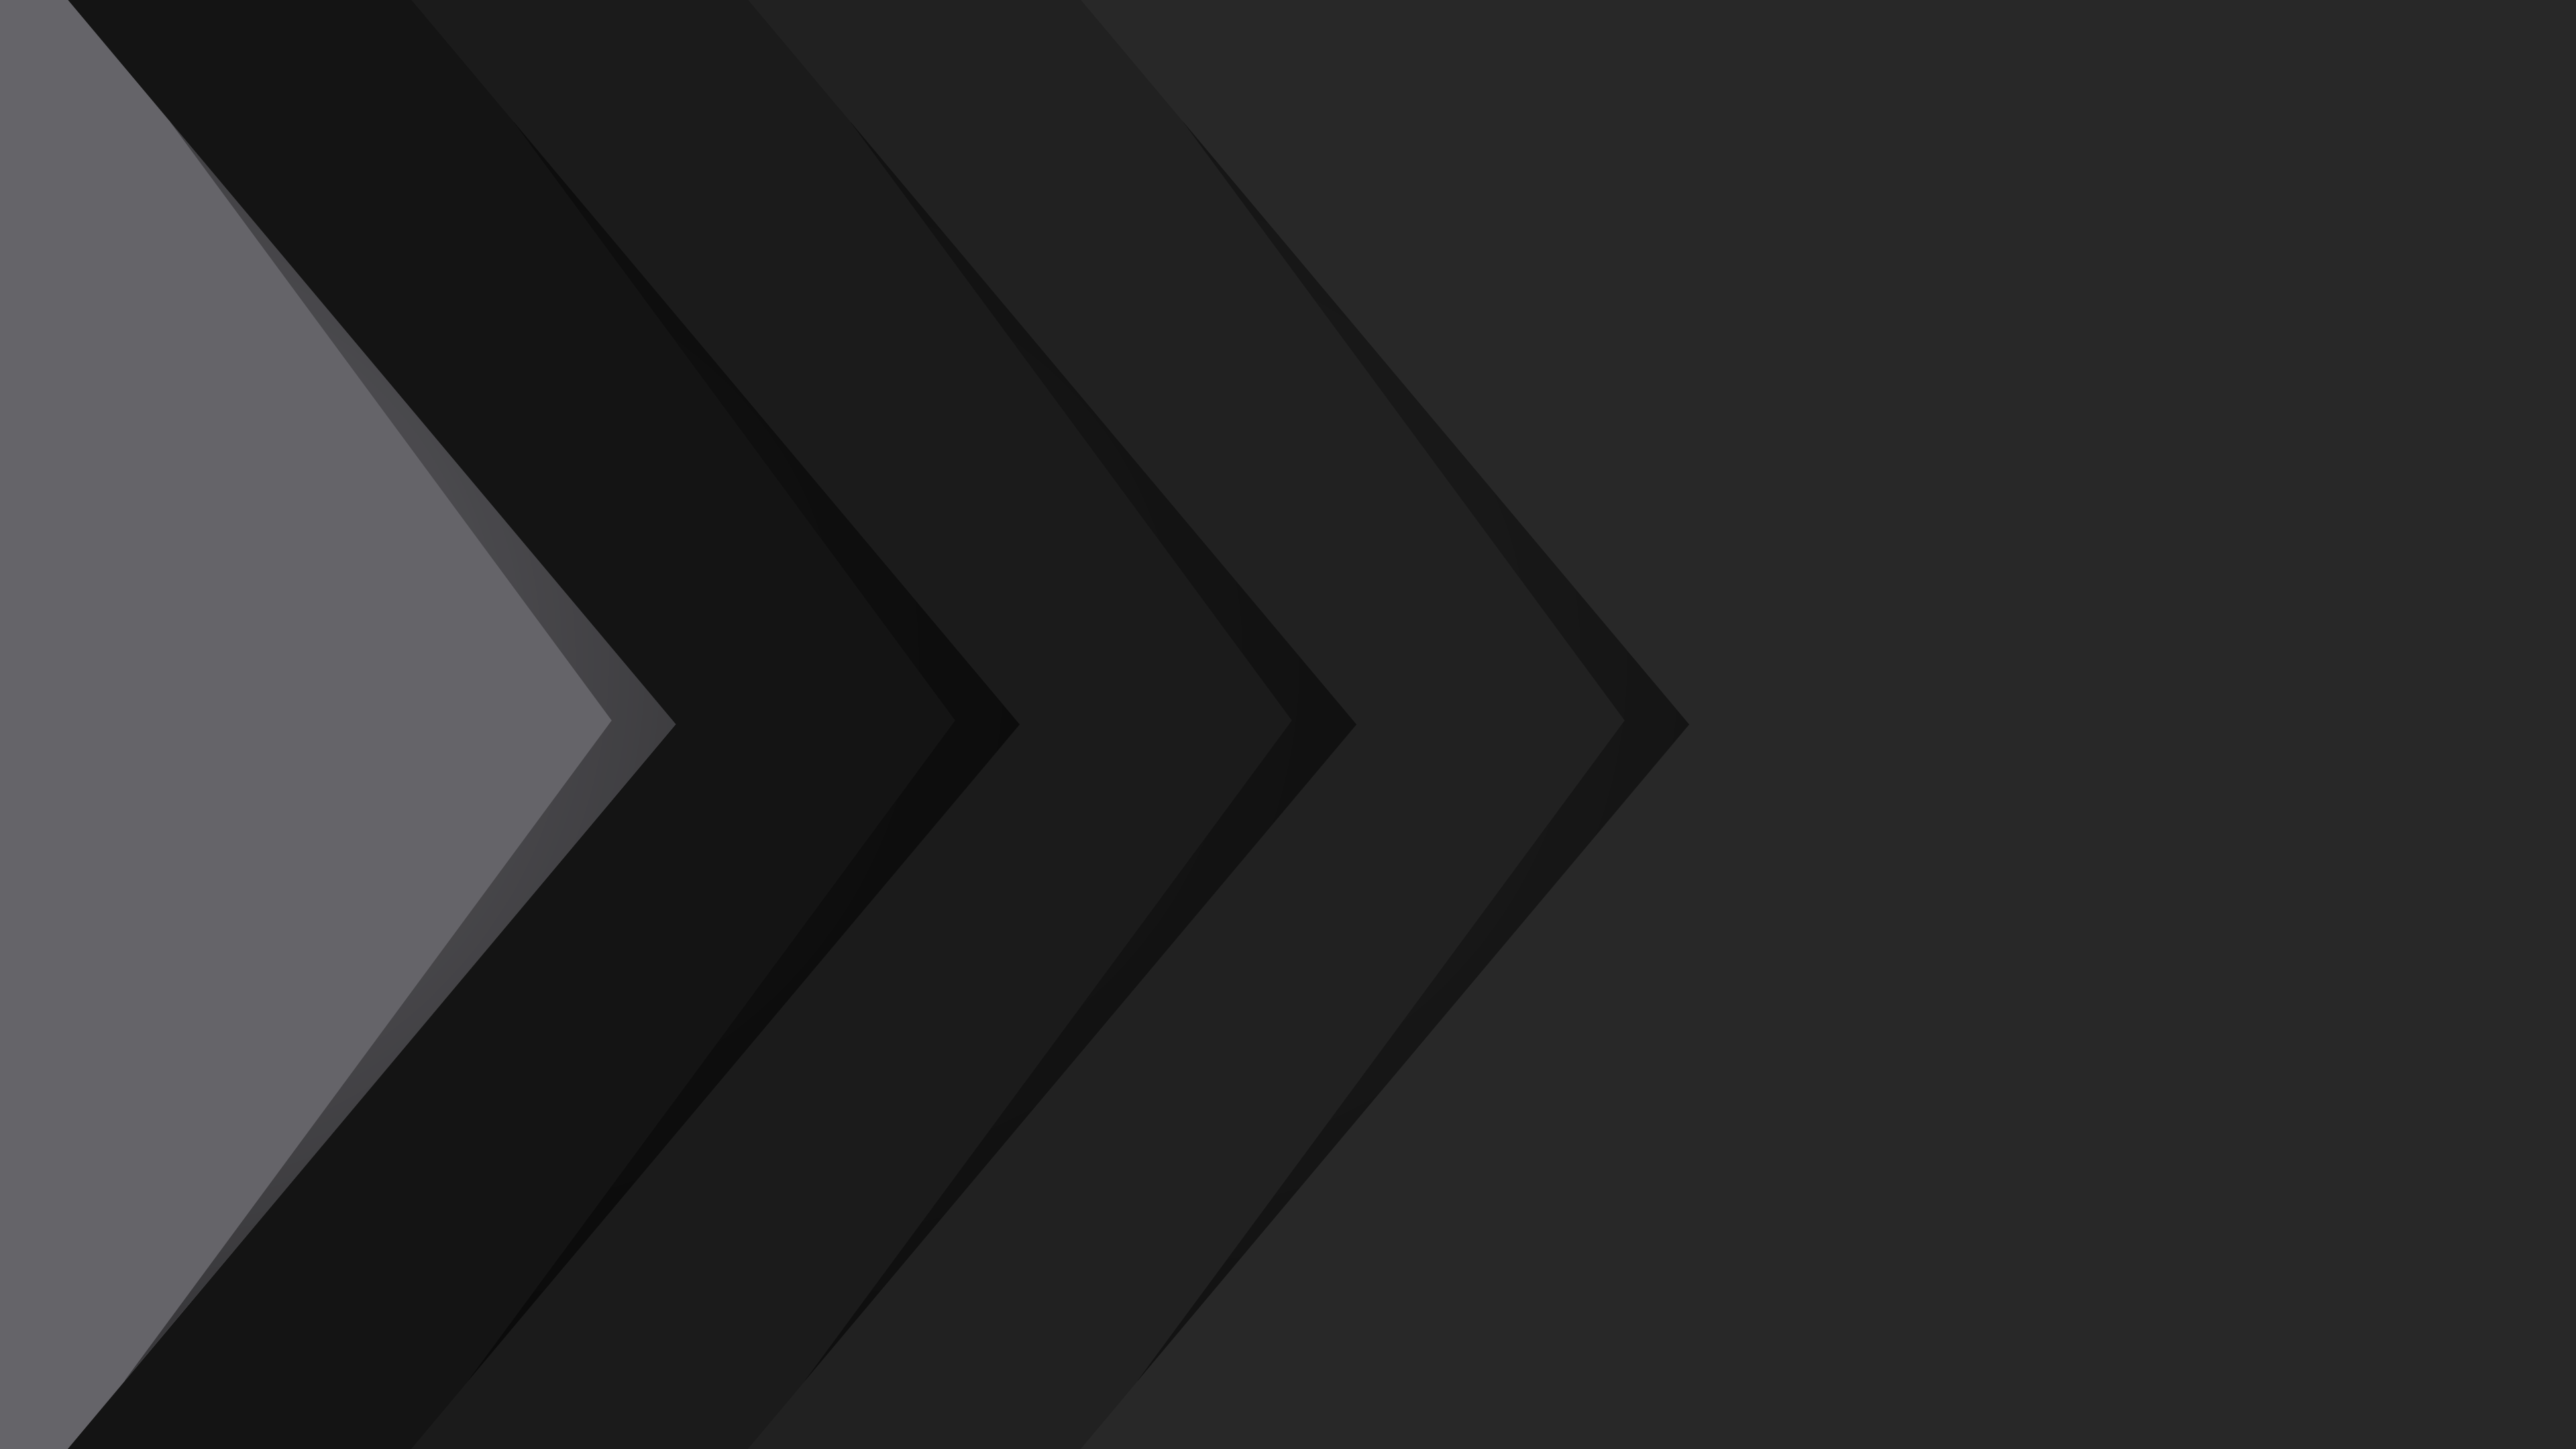 Black 4K wallpaper for your desktop or mobile screen free and easy to download